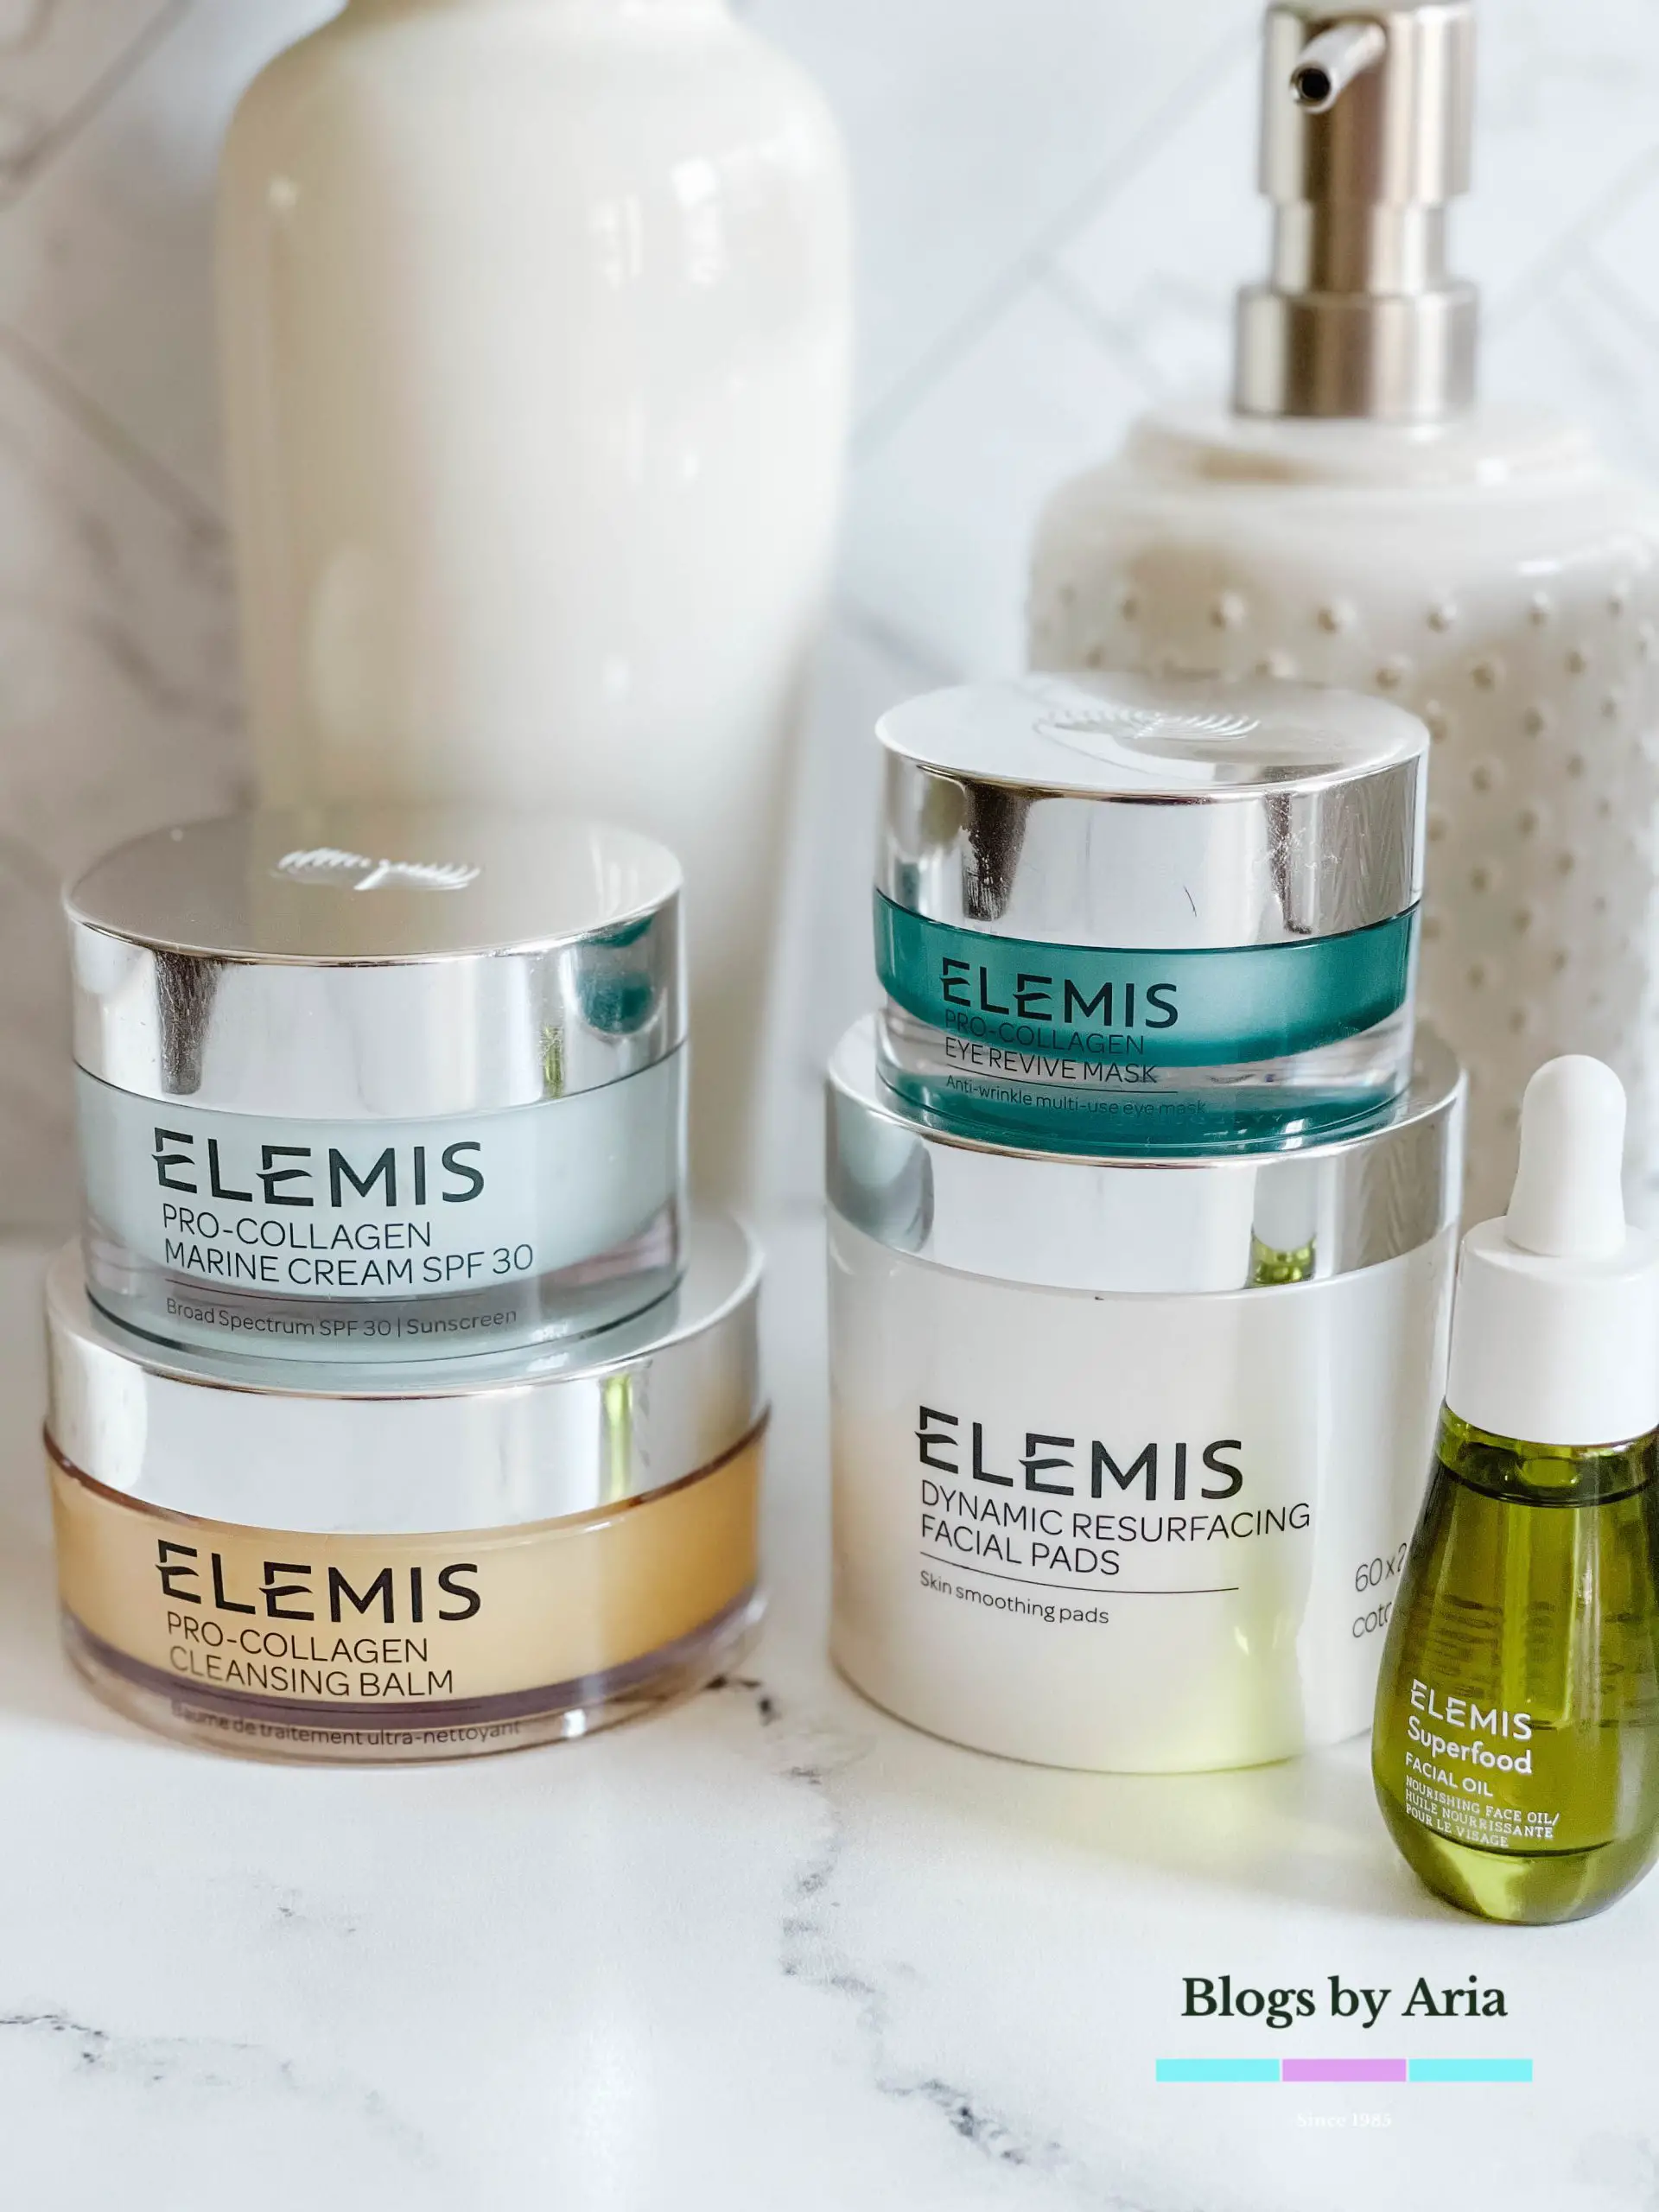 ELEMIS Review: Is it Worth the Money? - Patience and Pearls